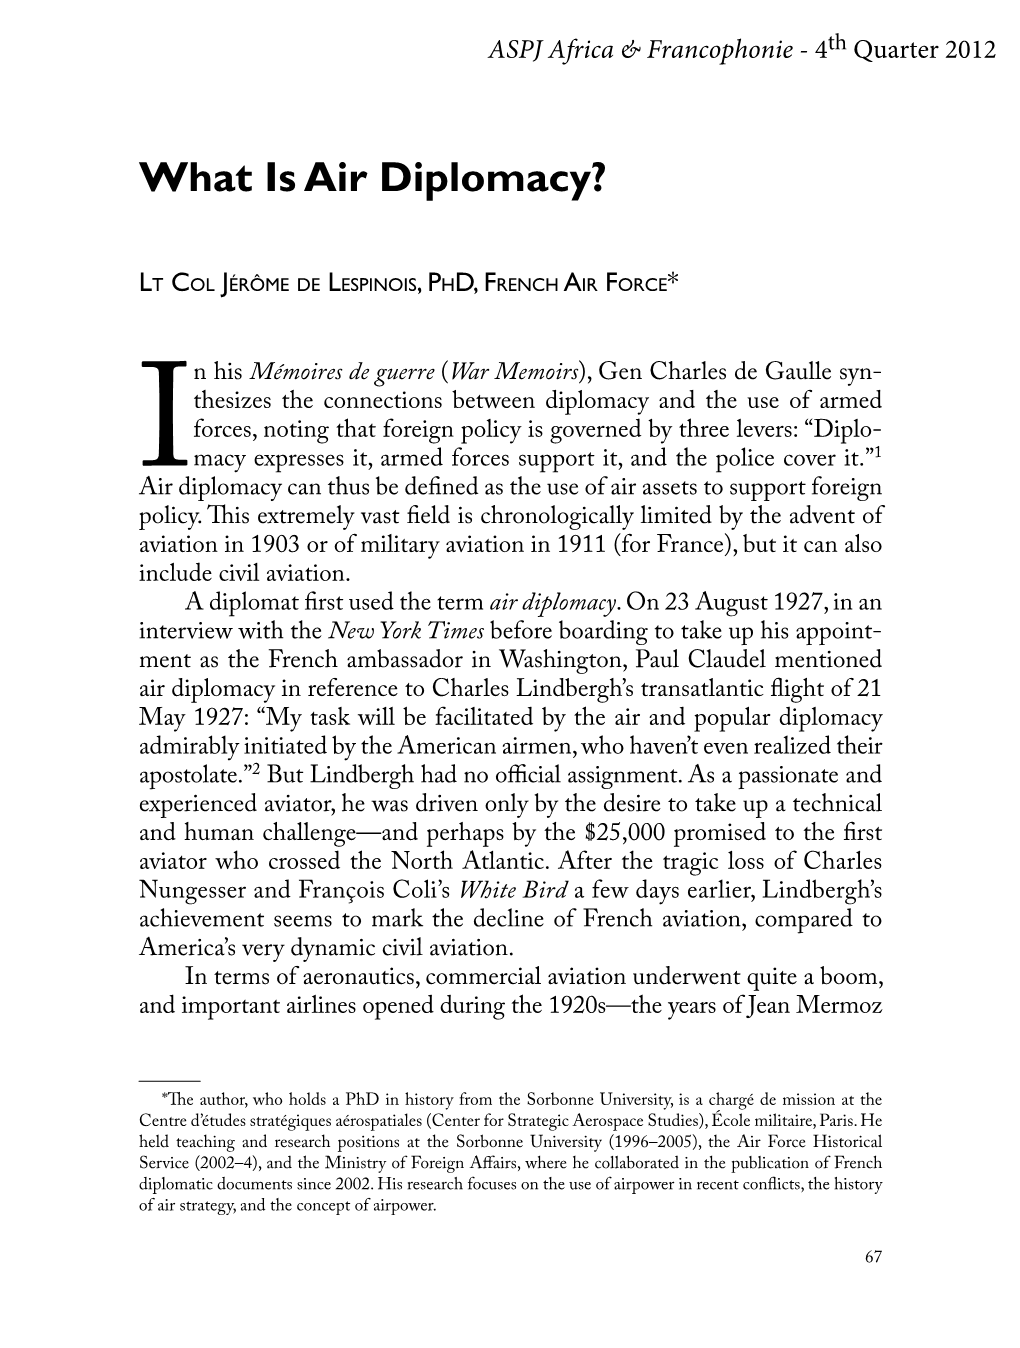 What Is Air Diplomacy?